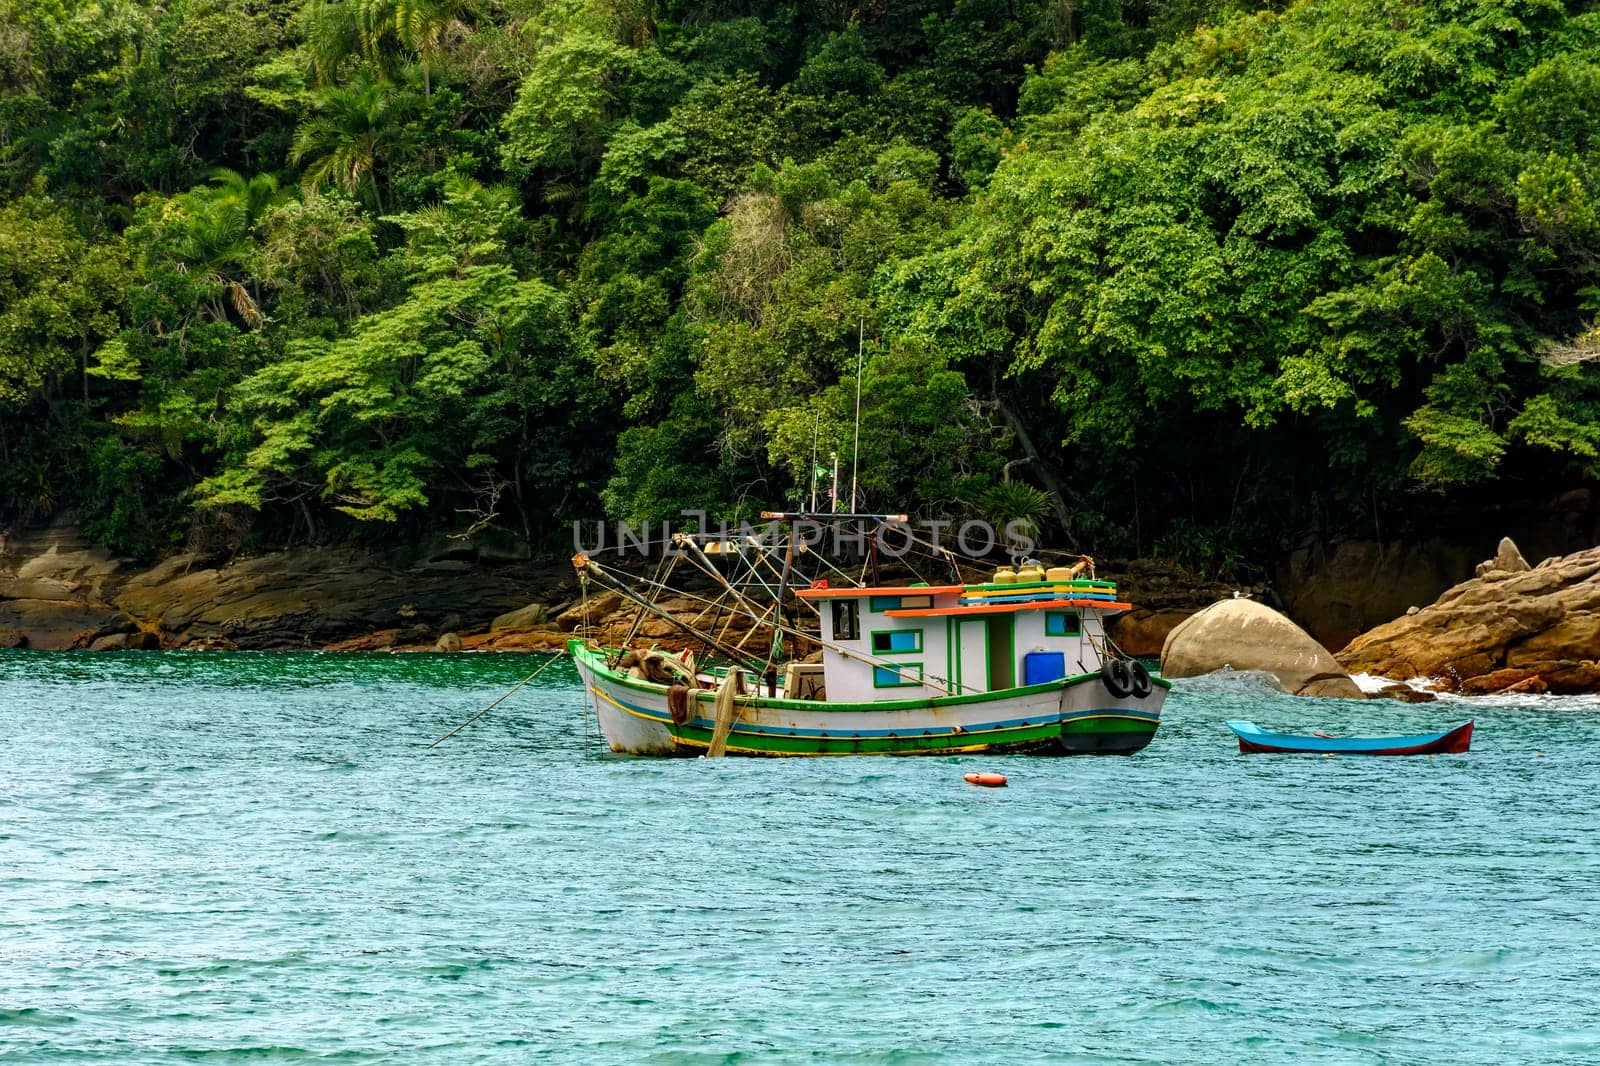 Fishing trawler anchored along the rocks and forest by the sea in Trindade, Rio de Janeiro, Brazil